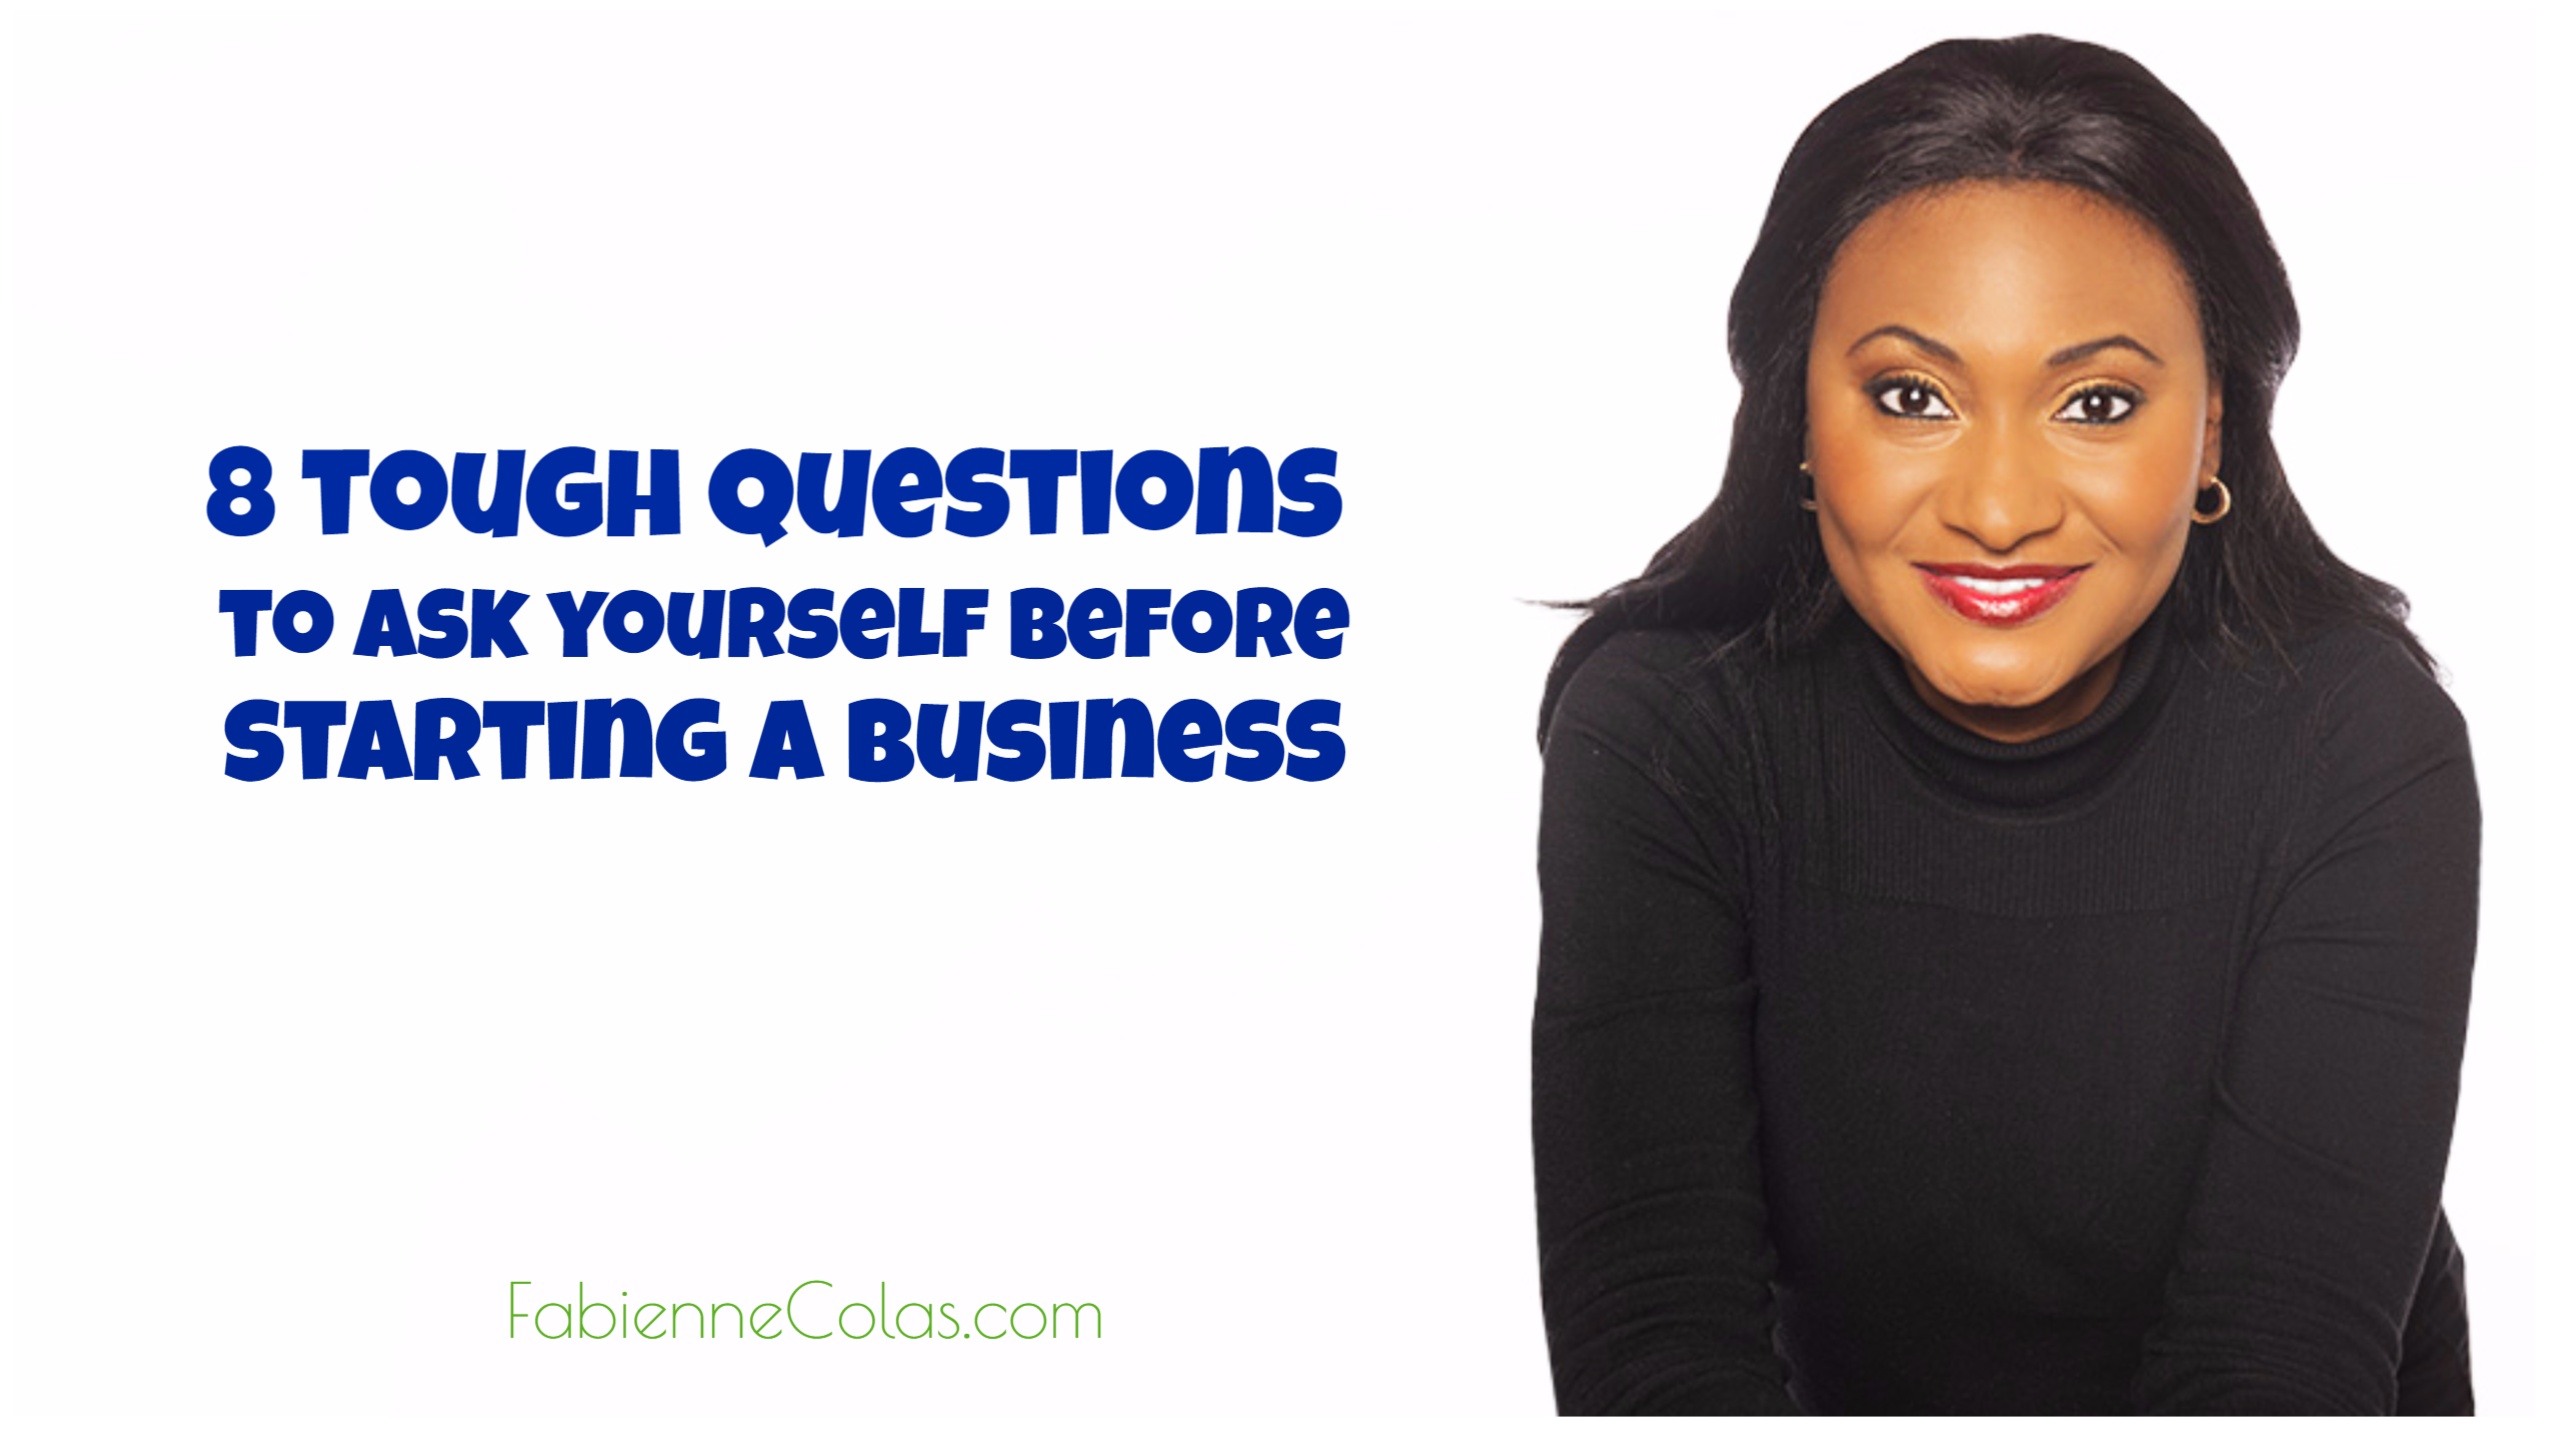 8 tough questions to ask yourself before starting a business